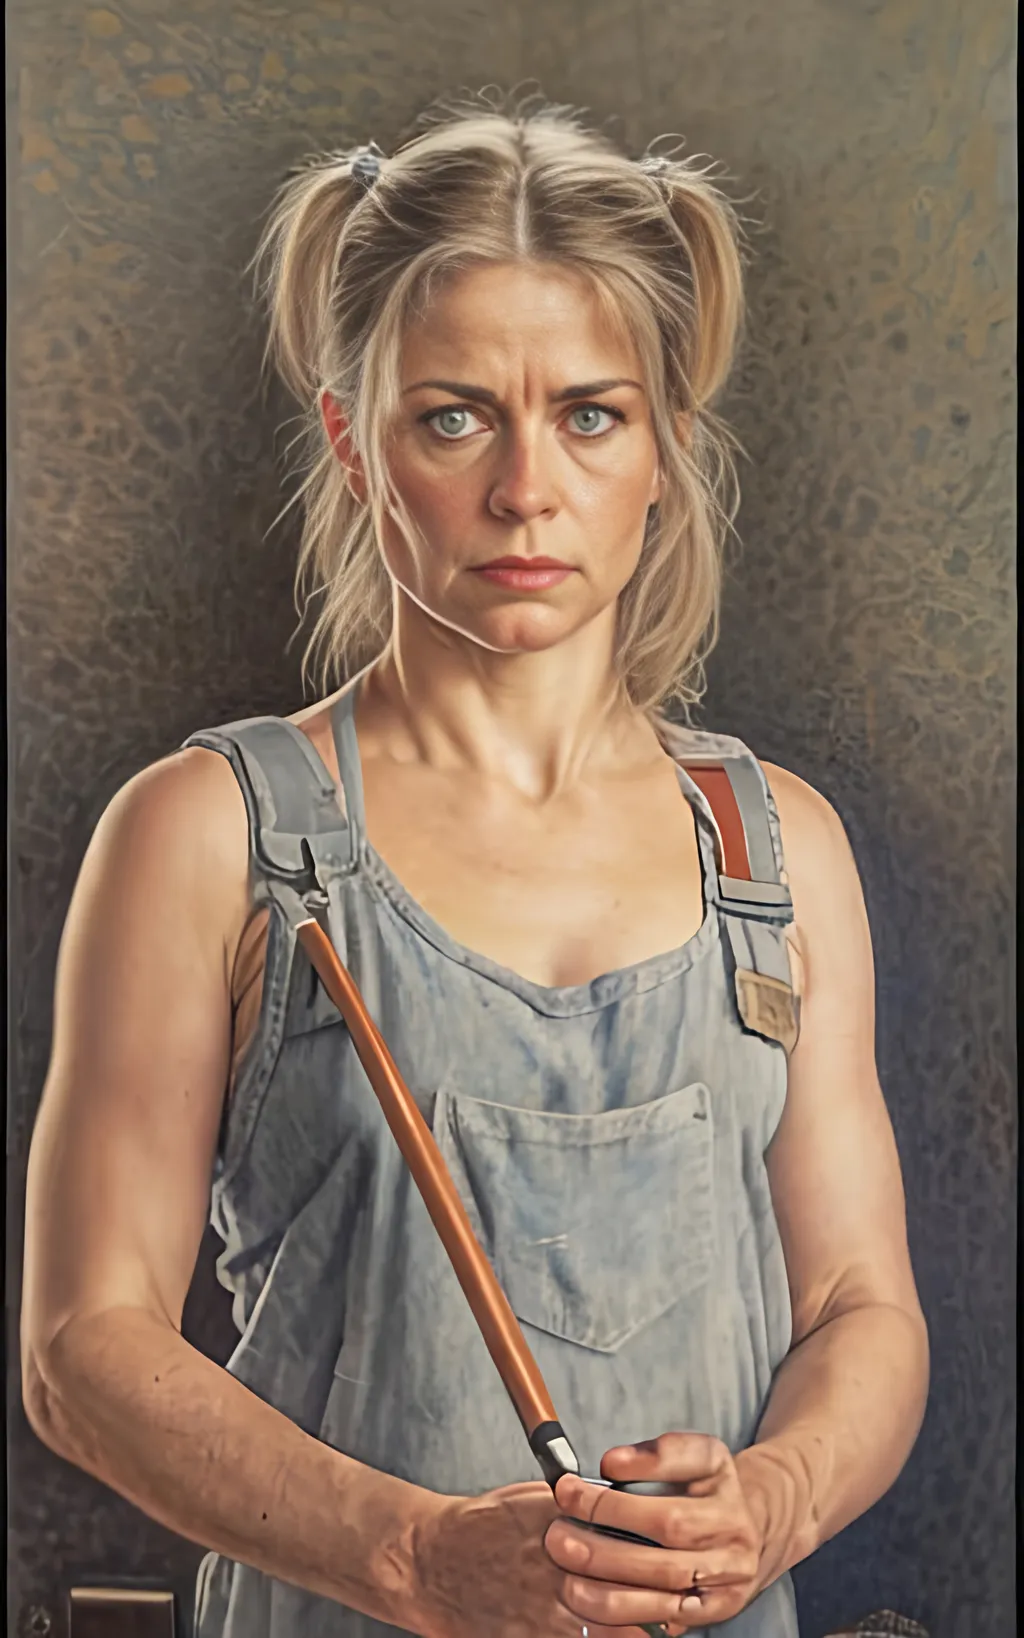 Prompt: create a highly detailed colored pencil drawing  standing portrait on grey paper, in the style of Norman Rockwell, Tsutomu Nihei and Steve Hanks. Every detail is meticulously captured, in HDR (High Dynamic Range), UHD (Ultra High Definition), and 1080p. Linda Hamilton, portraying Sarah Conner in the drama tv movie "Terminator." use costumes from the tv movie.

use all best practices in art and design to produce what would be recognized as a master work art piece. use accurate perspective and foreshortening. use atmospheric perspective. create expressive faces and use dramatic lighting. fur coat and fur hat.


Linda Hamilton, portraying Sarah Conner develops from a timid damsel in distress victim in the first film to a wanted fugitive committing acts of terrorism, a hardened warrior and mother who sacrificed everything for her son's future, on the verge of losing touch with her own humanity, and a mentor preparing and protecting a protégée for her destiny. portray her in her 20s wearing army gear.